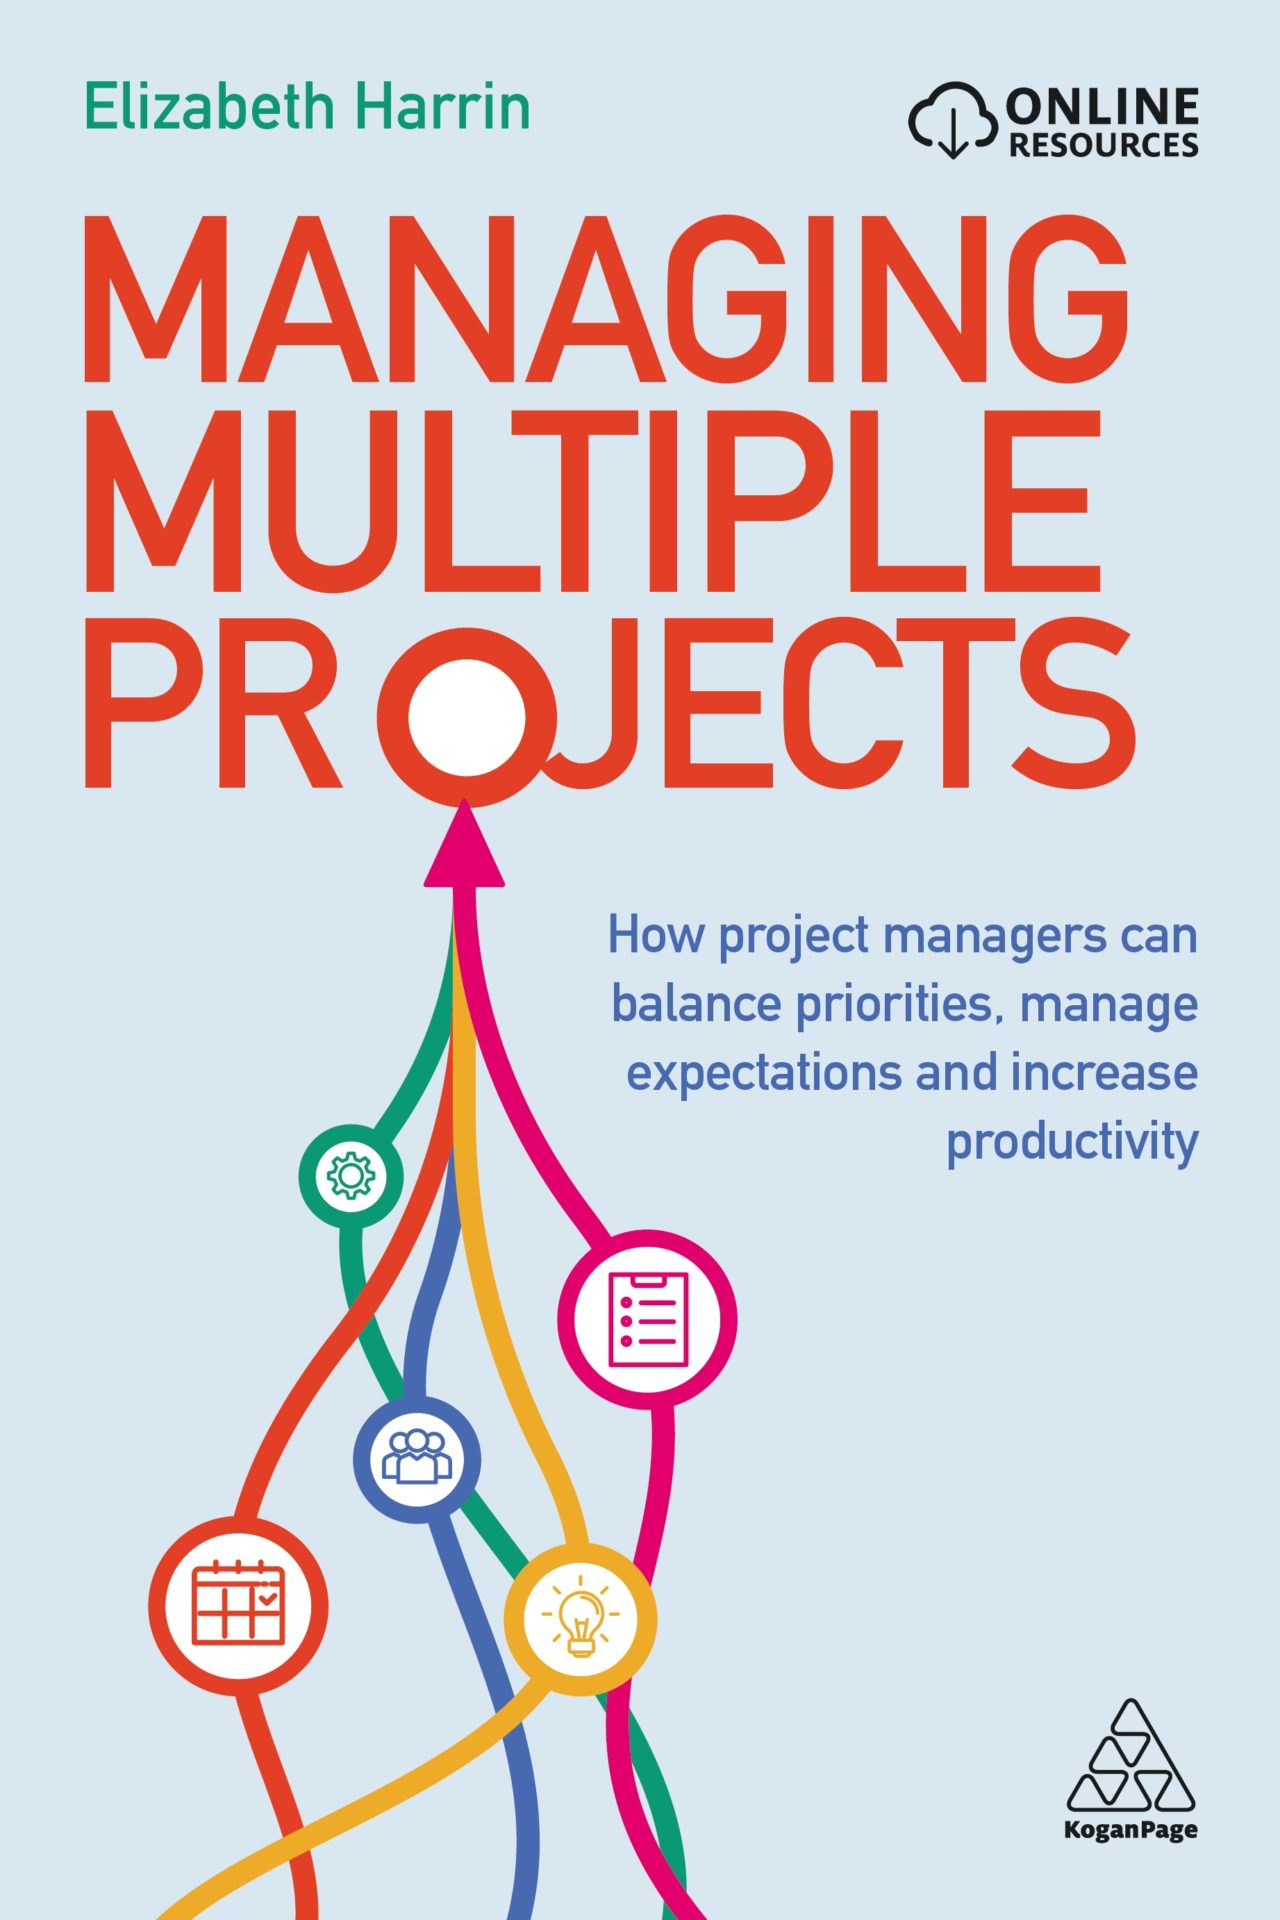 AMBA Book Club: Managing Multiple Projects